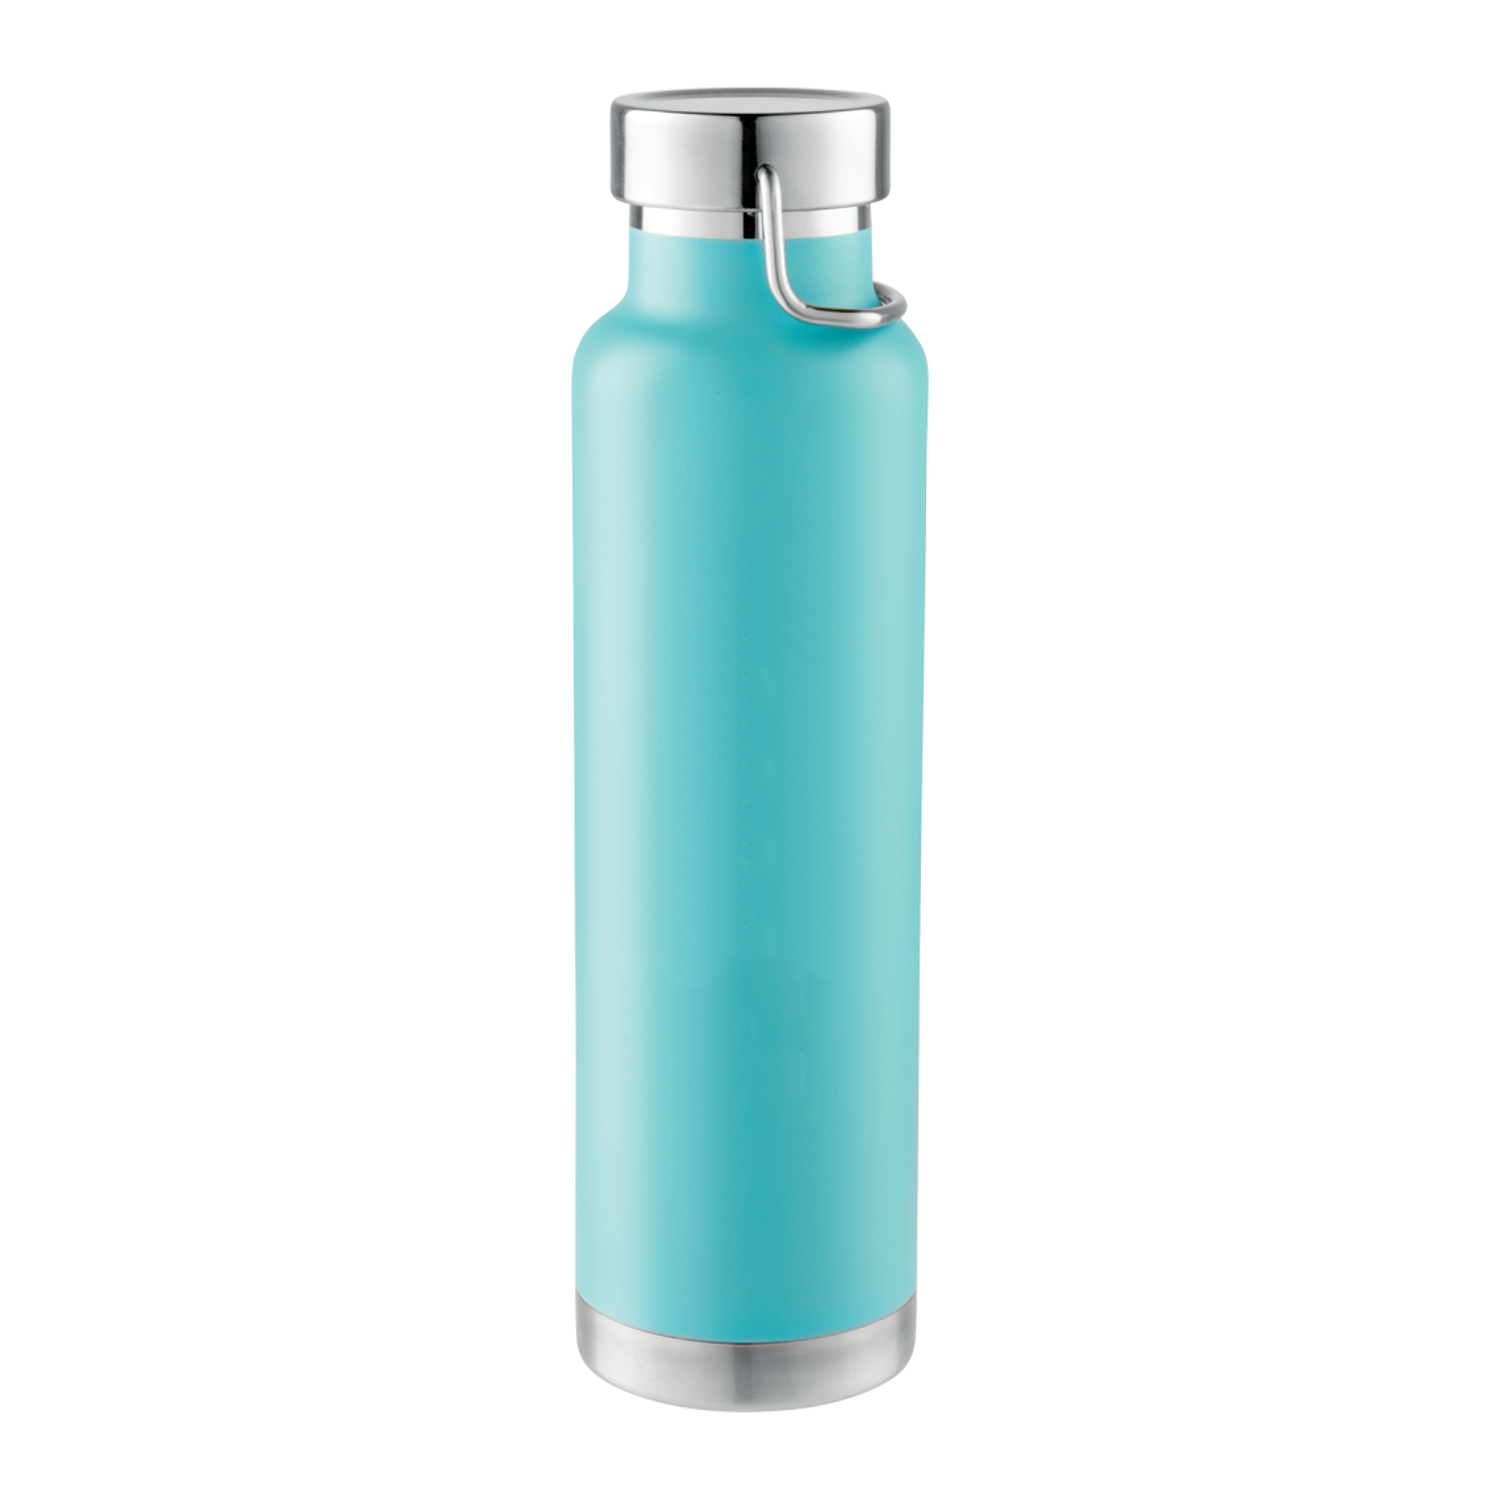 https://www.nyfifth.com/category/20220722/leeds-1625-85-thor-copper-vacuum-insulated-bottle-22oz_Mint-Green.png